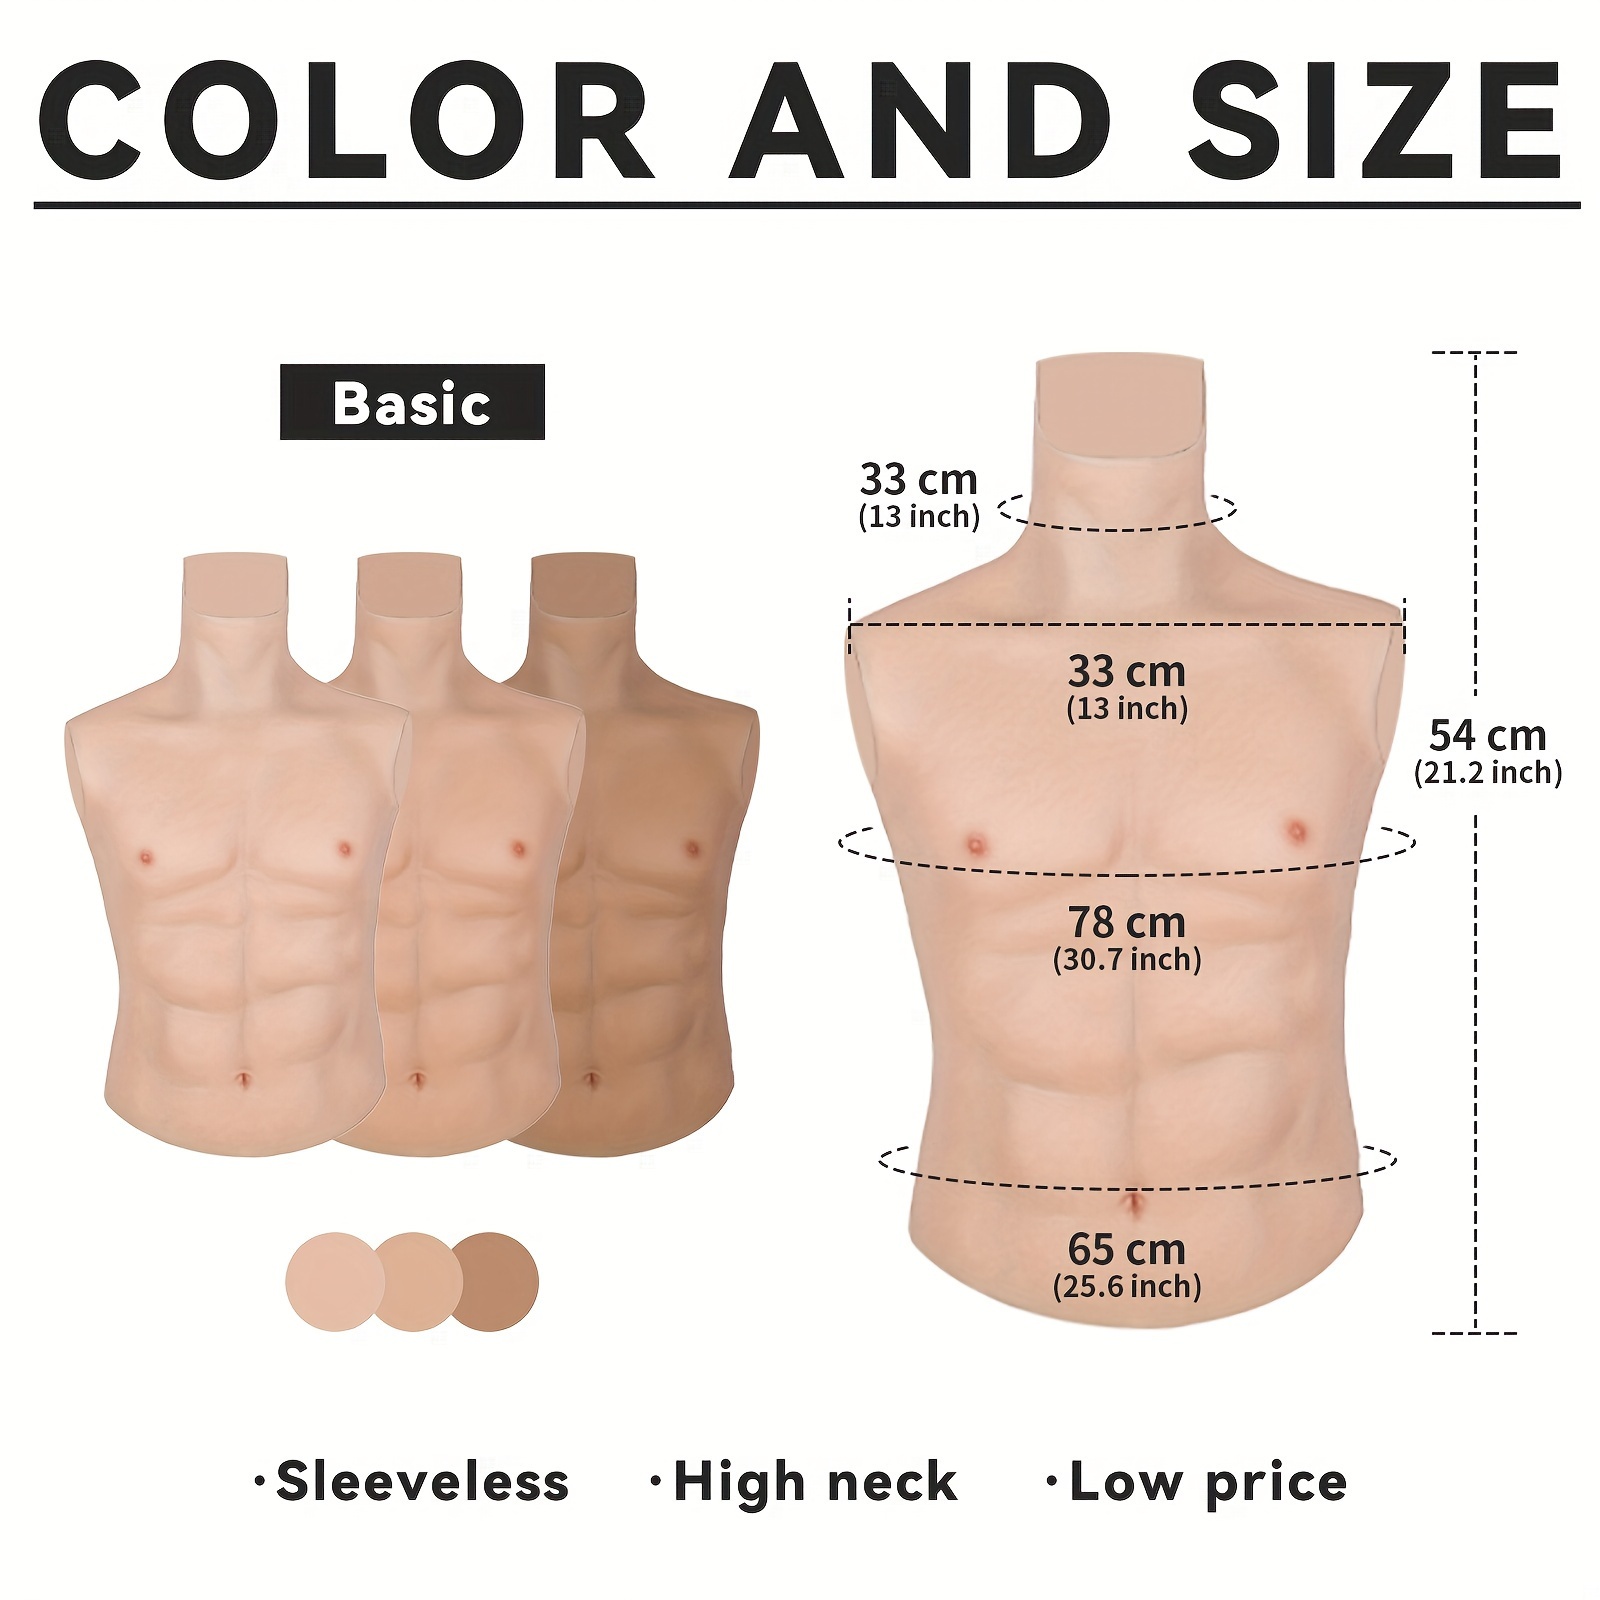  Silicone Muscle Suit Men Fake Abs with Muscle Arms, Realistic  Silicone Fake Chest Muscle Body Suit with Abdomen Macho Muscle Men Cosplay  (Color#01, Free Size) : Clothing, Shoes & Jewelry